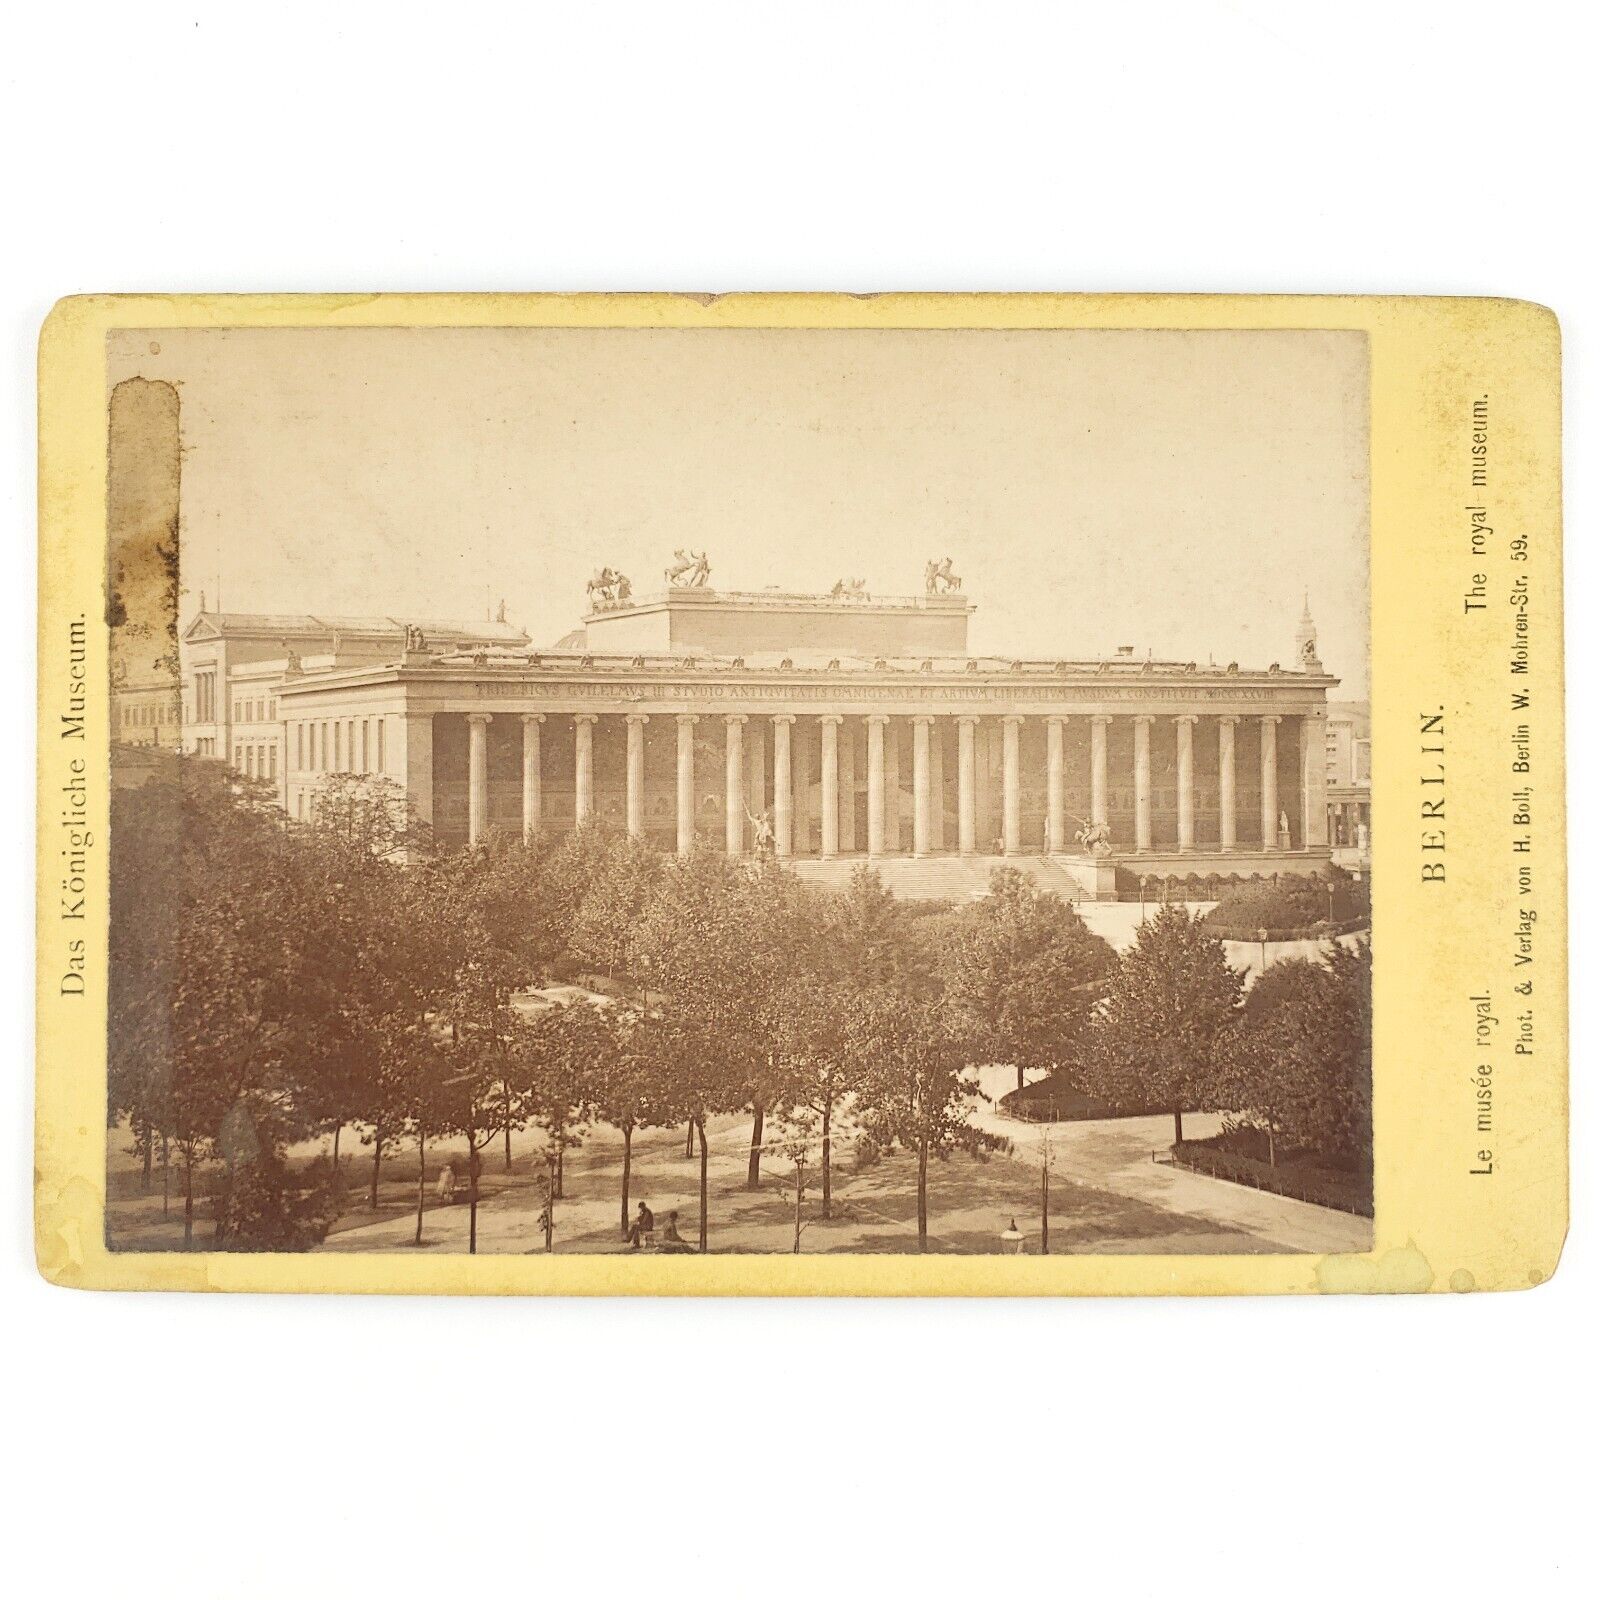 Altes Museum Island Cabinet Card c1885 Berlin Germany Antique Street Photo A3252